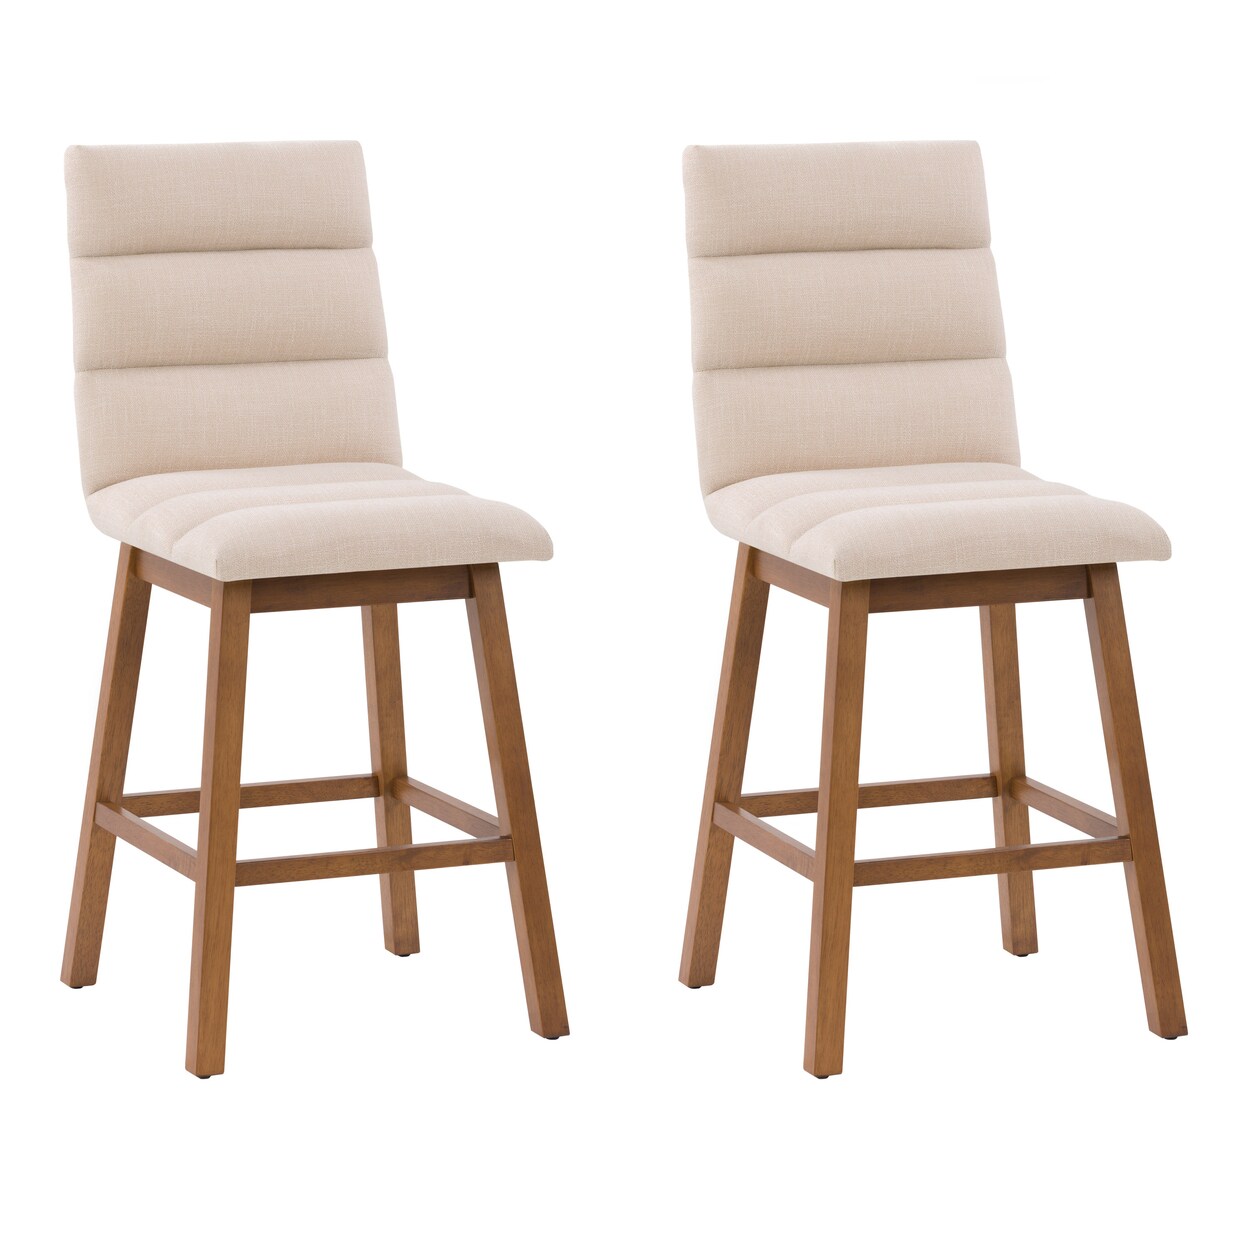 CorLiving   Boston Channel Tufted Fabric Barstool Beige Set of 2